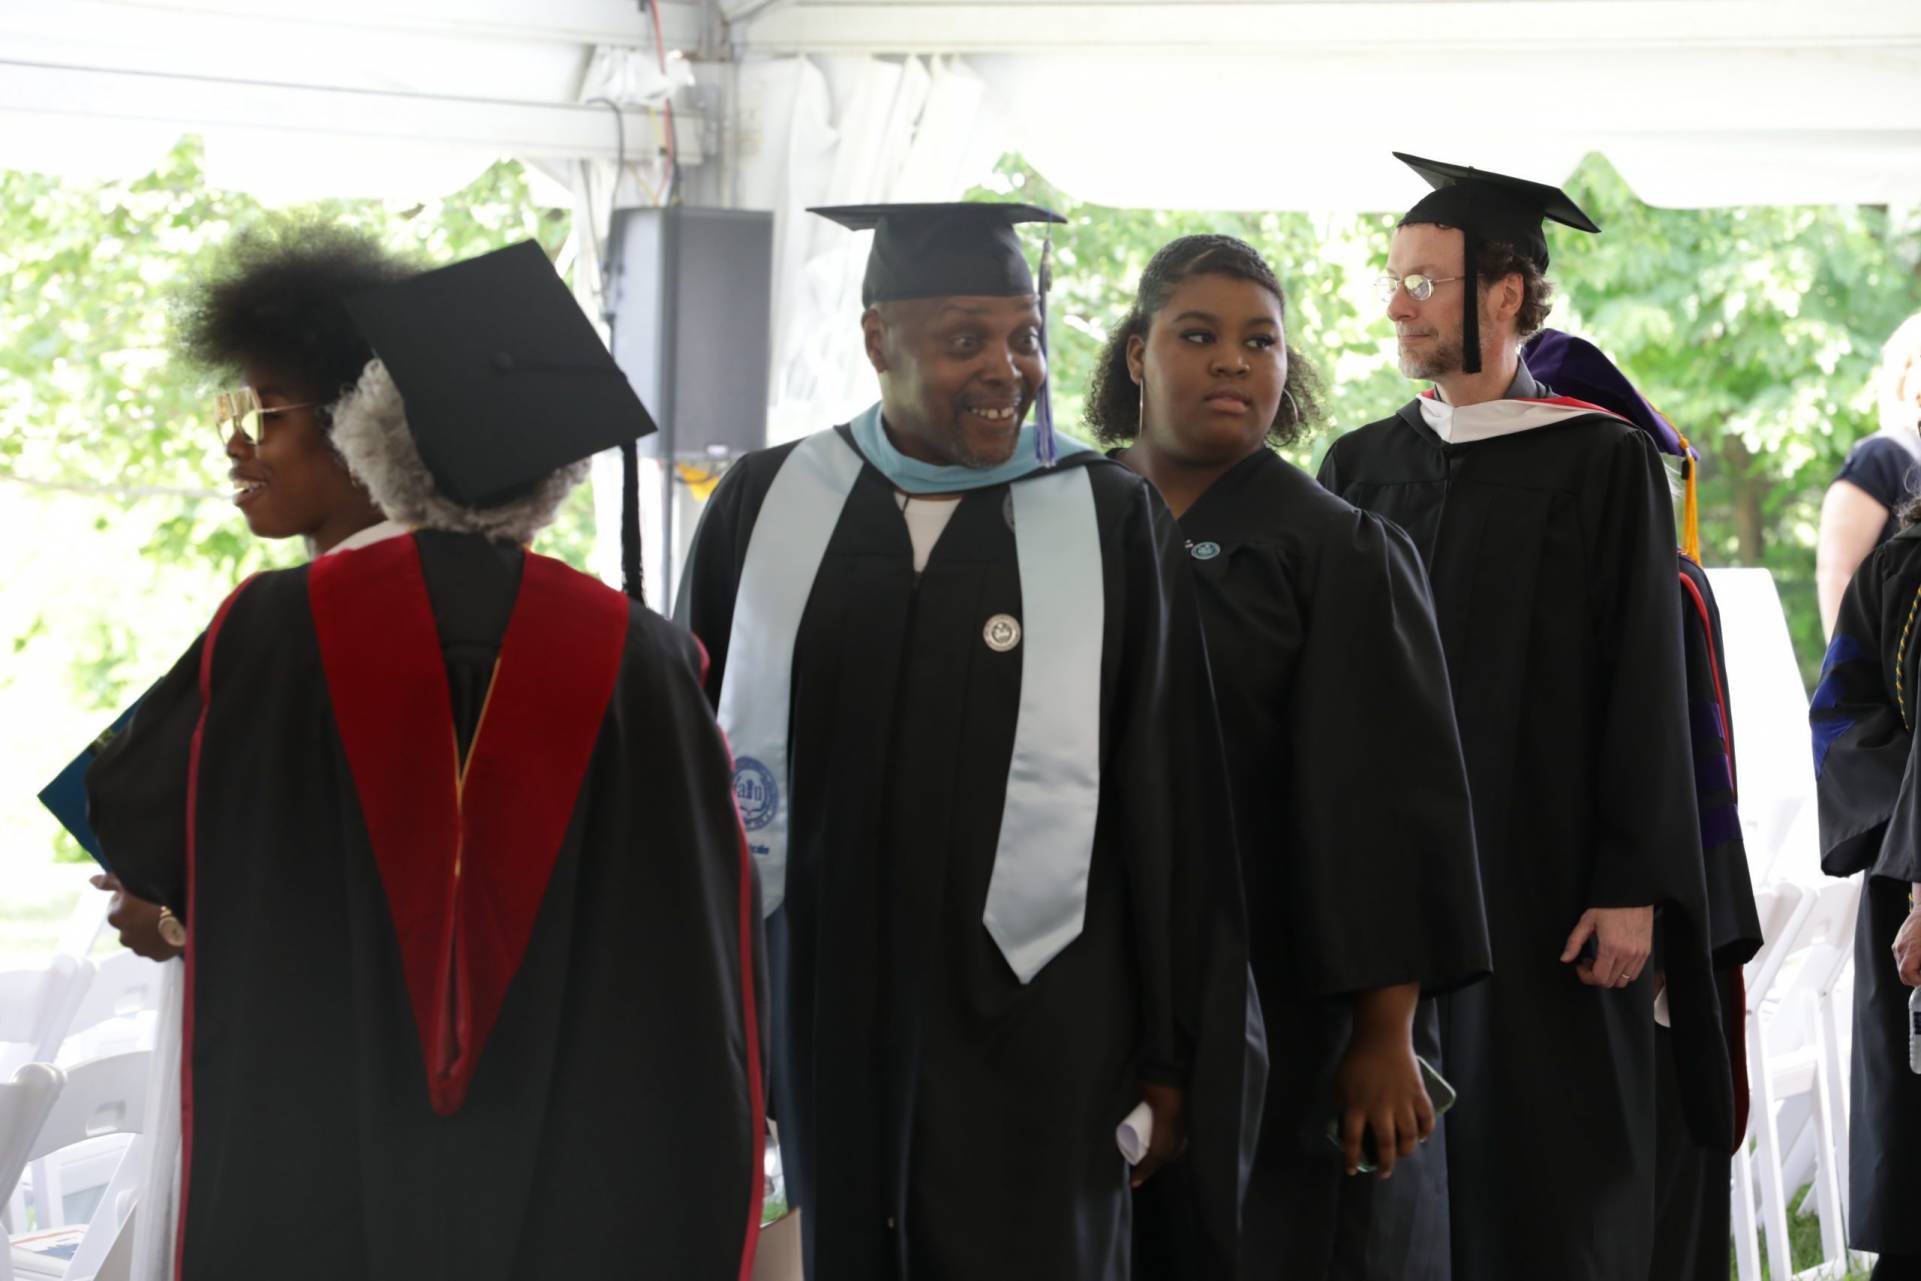 Faculty and Staff members walking for the Installation of Dr. Harvey-Smith.